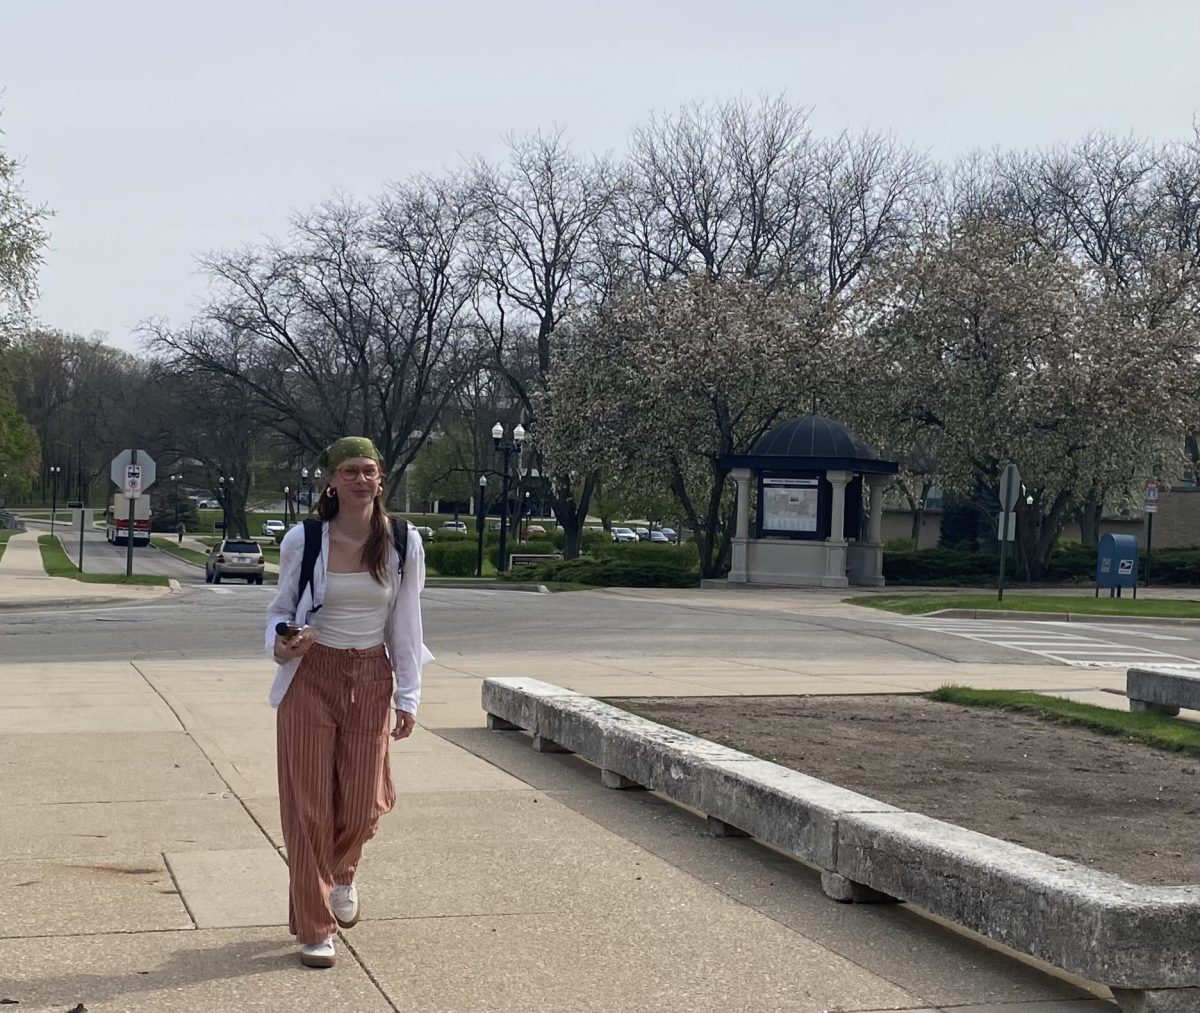 Sarah+Marsh%2C+a+sophomore+communications+major%2C+walks+near+the+East+Lagoon.+With+the+chaotic+weather+of+spring%2C+students+should+dress+in+layers+to+fit+the+changing+temperatures.+%28Brynn+Krug+%7C+Northern+Star%29